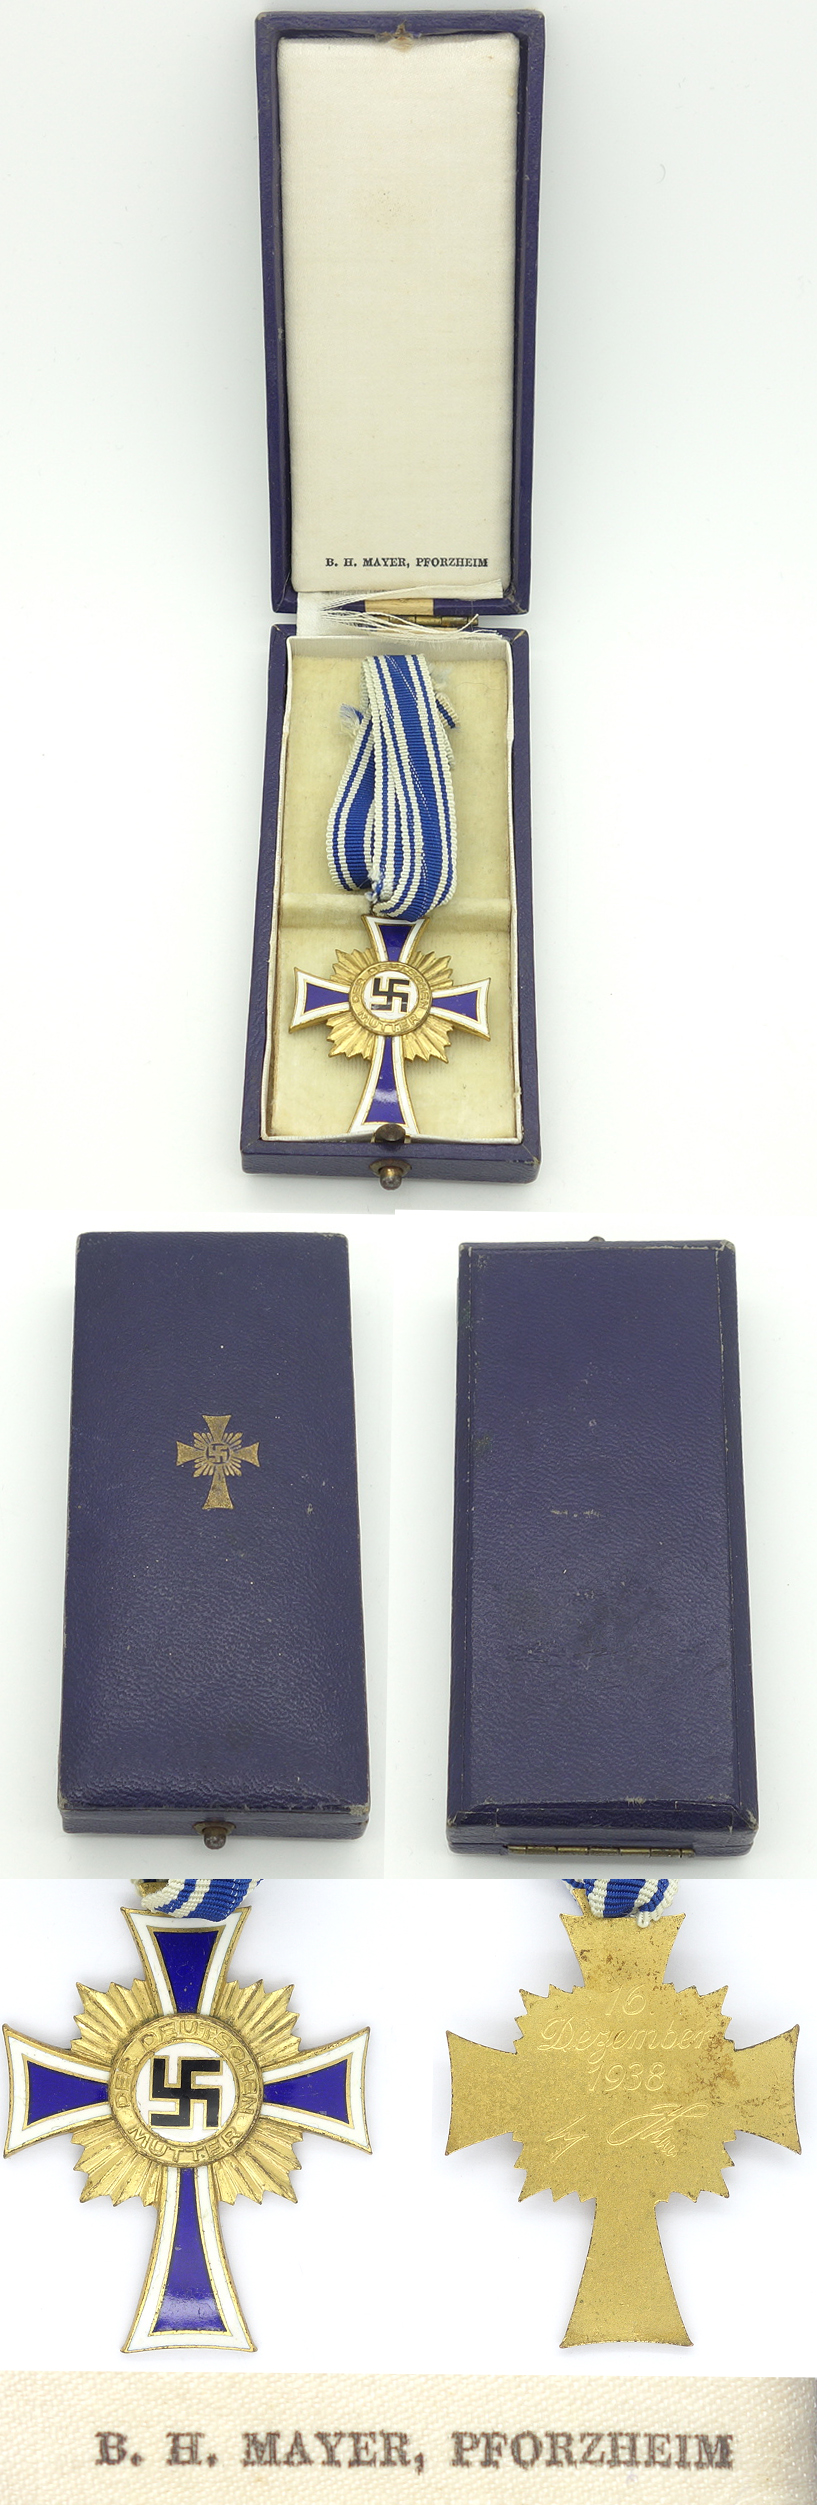 Cased Mothers Cross in Gold by B H Mayer